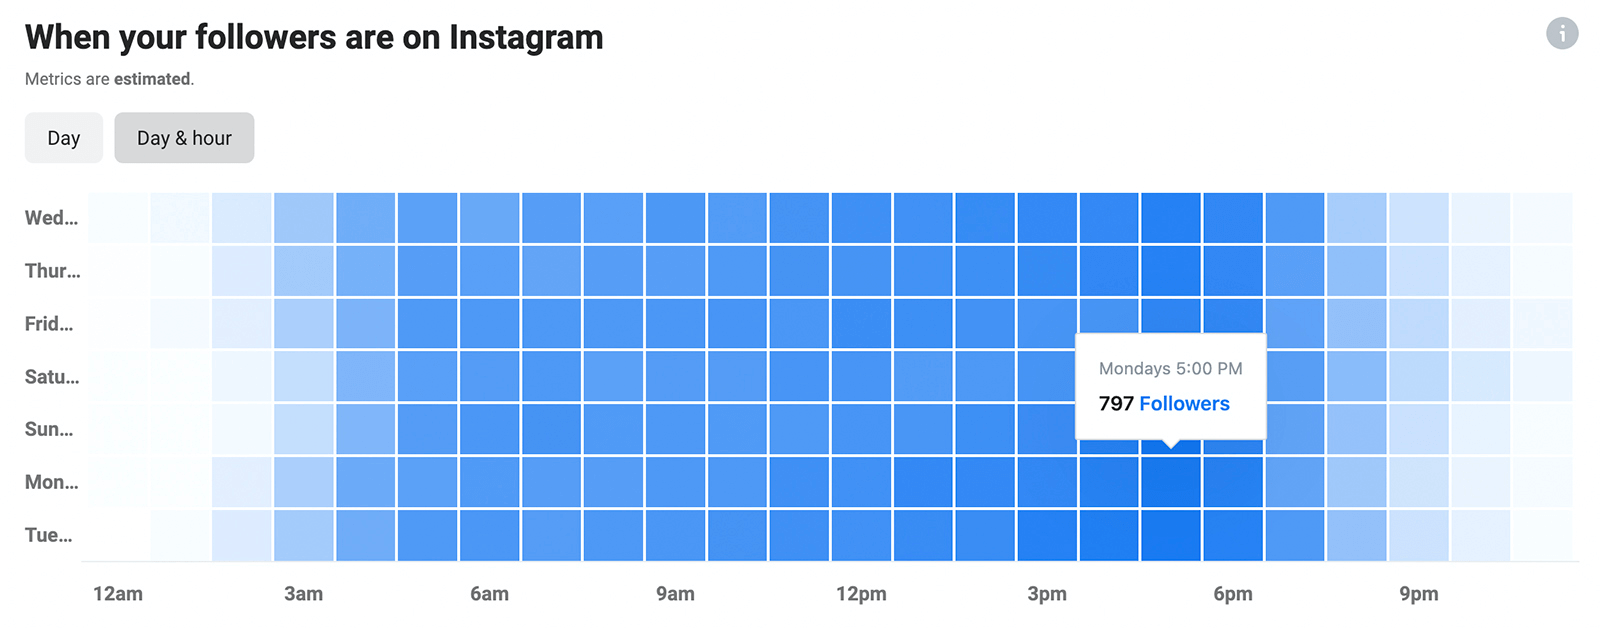 image of Instagram Insights data on when your followers are on Instagram